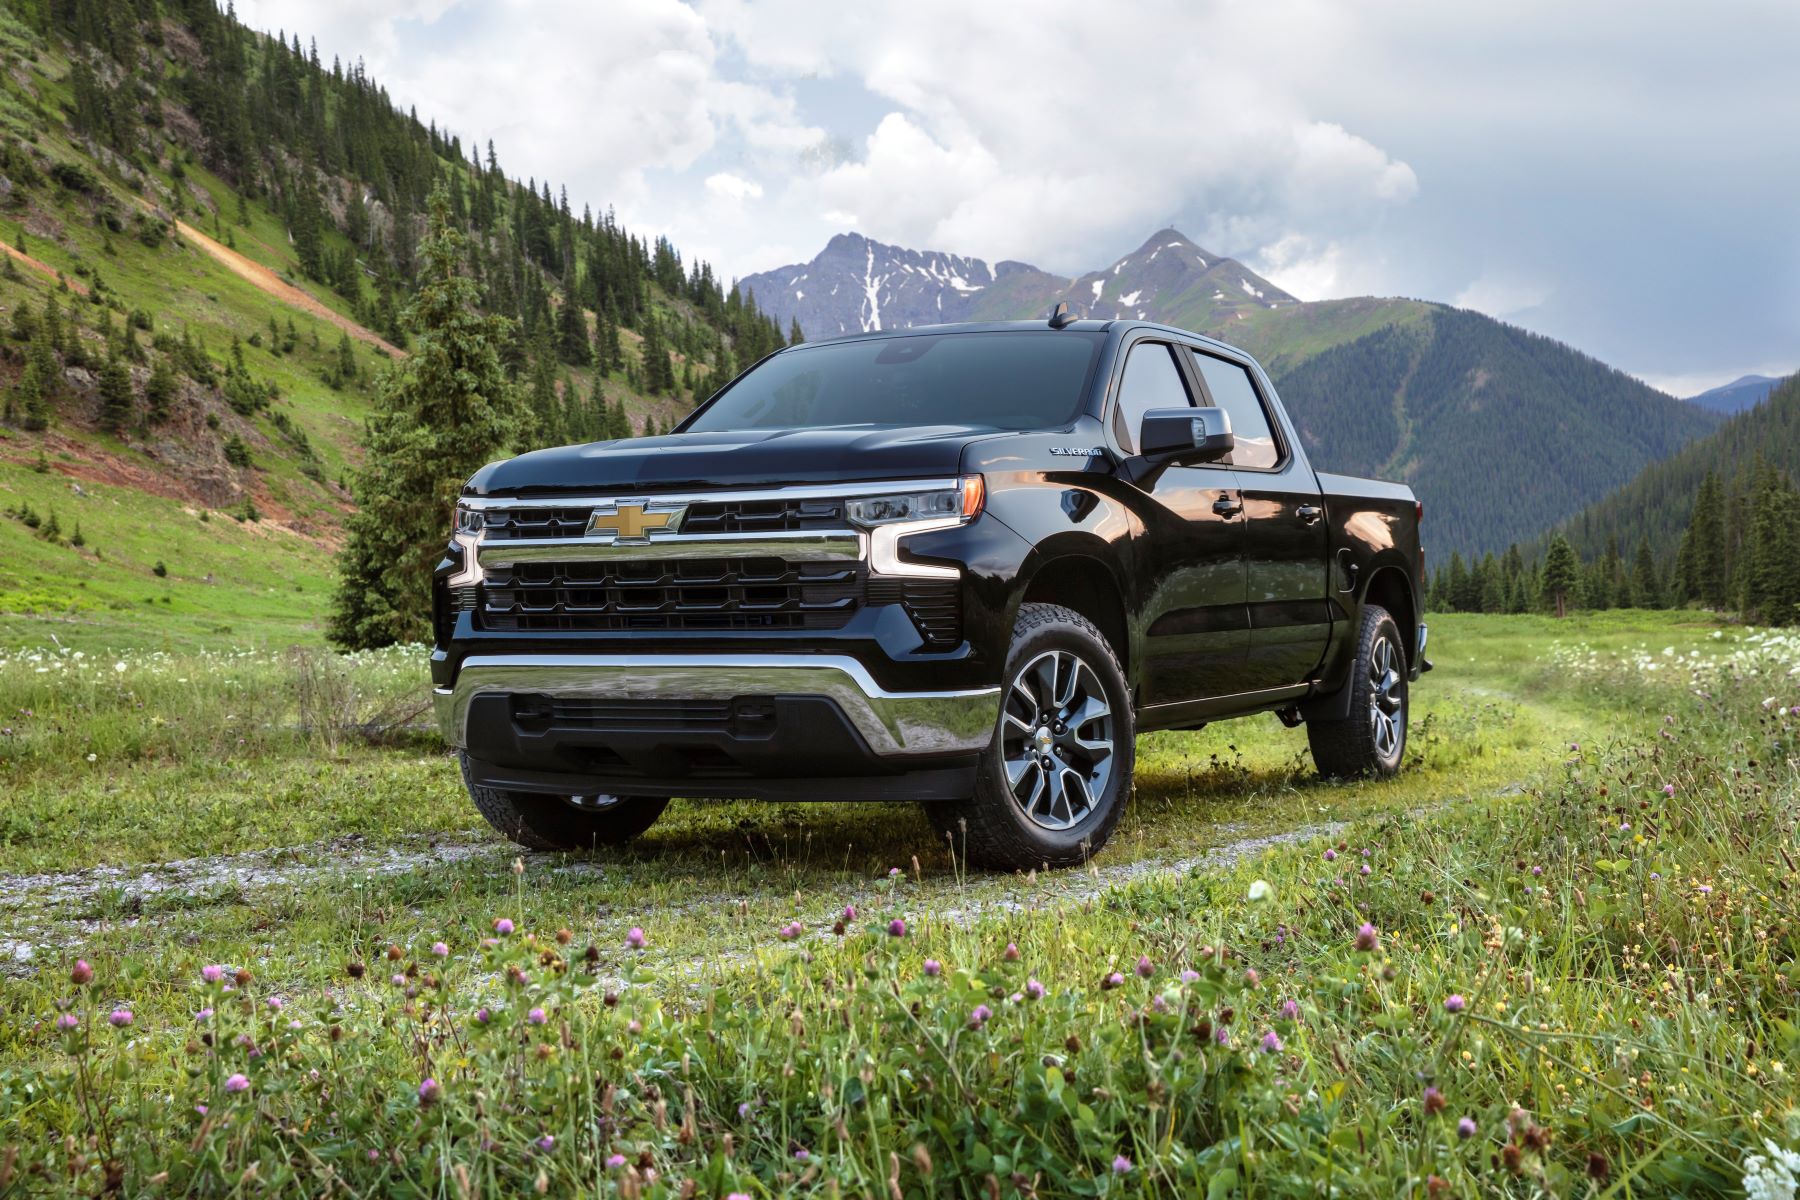 A 2022 Chevy Silverado LT full-size pickup truck parked on a grass field near mountains of forests